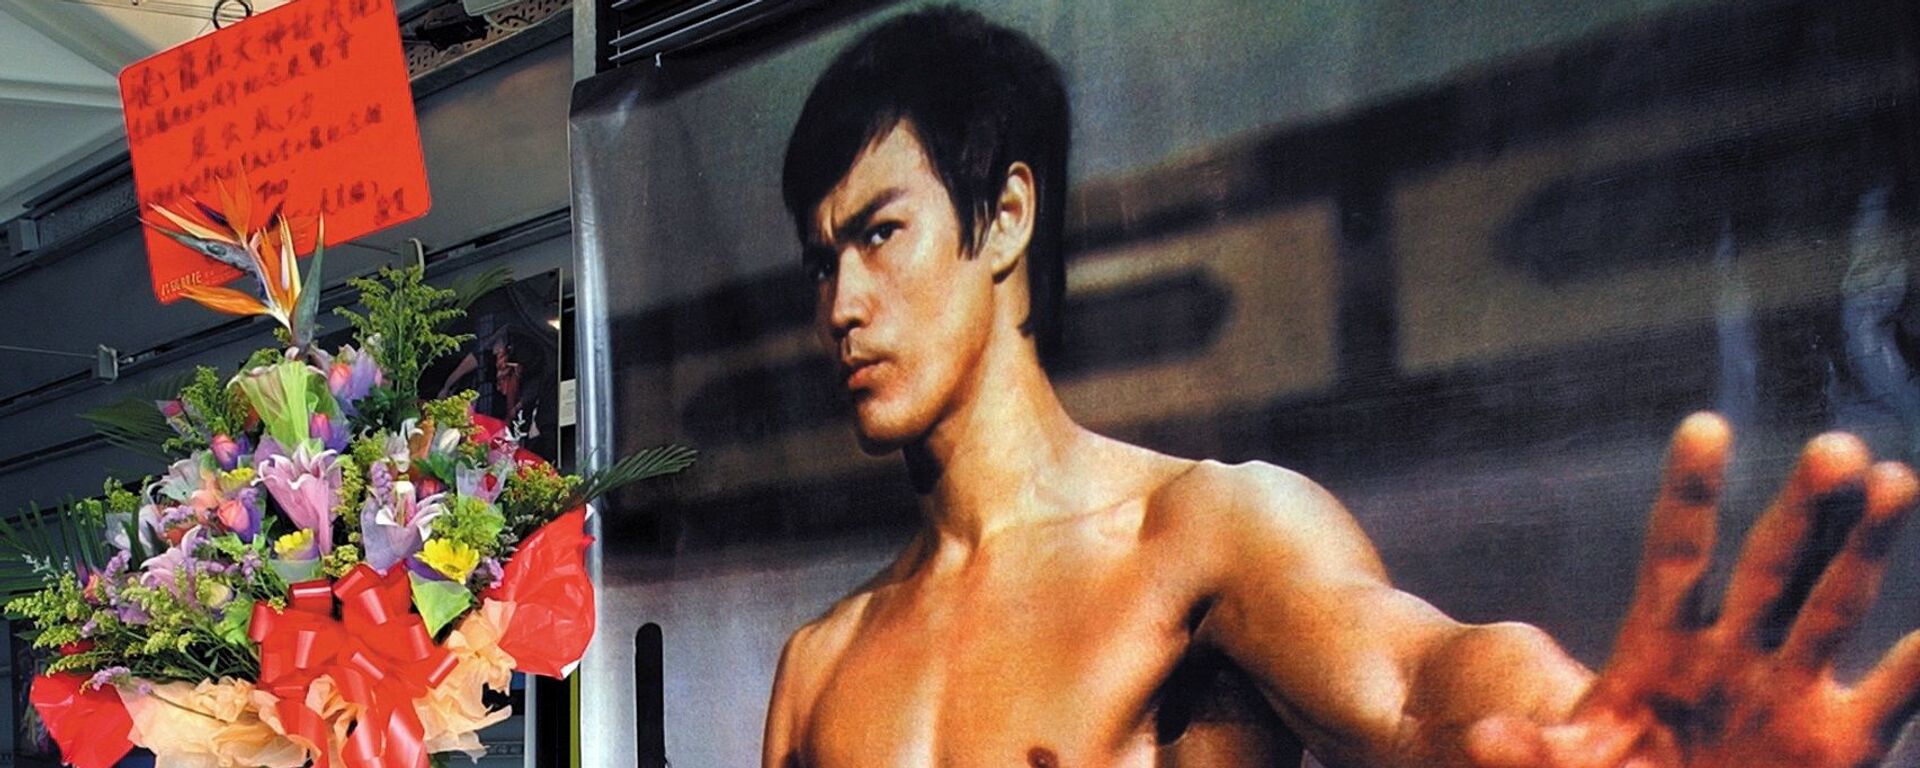 A giant poster of kung fu legend Bruce Lee during an exhibition at Hong Kong's Art center marking the 30th anniversary of Lee's death in this Wednesday, July 16, 2003 - Sputnik International, 1920, 14.10.2020